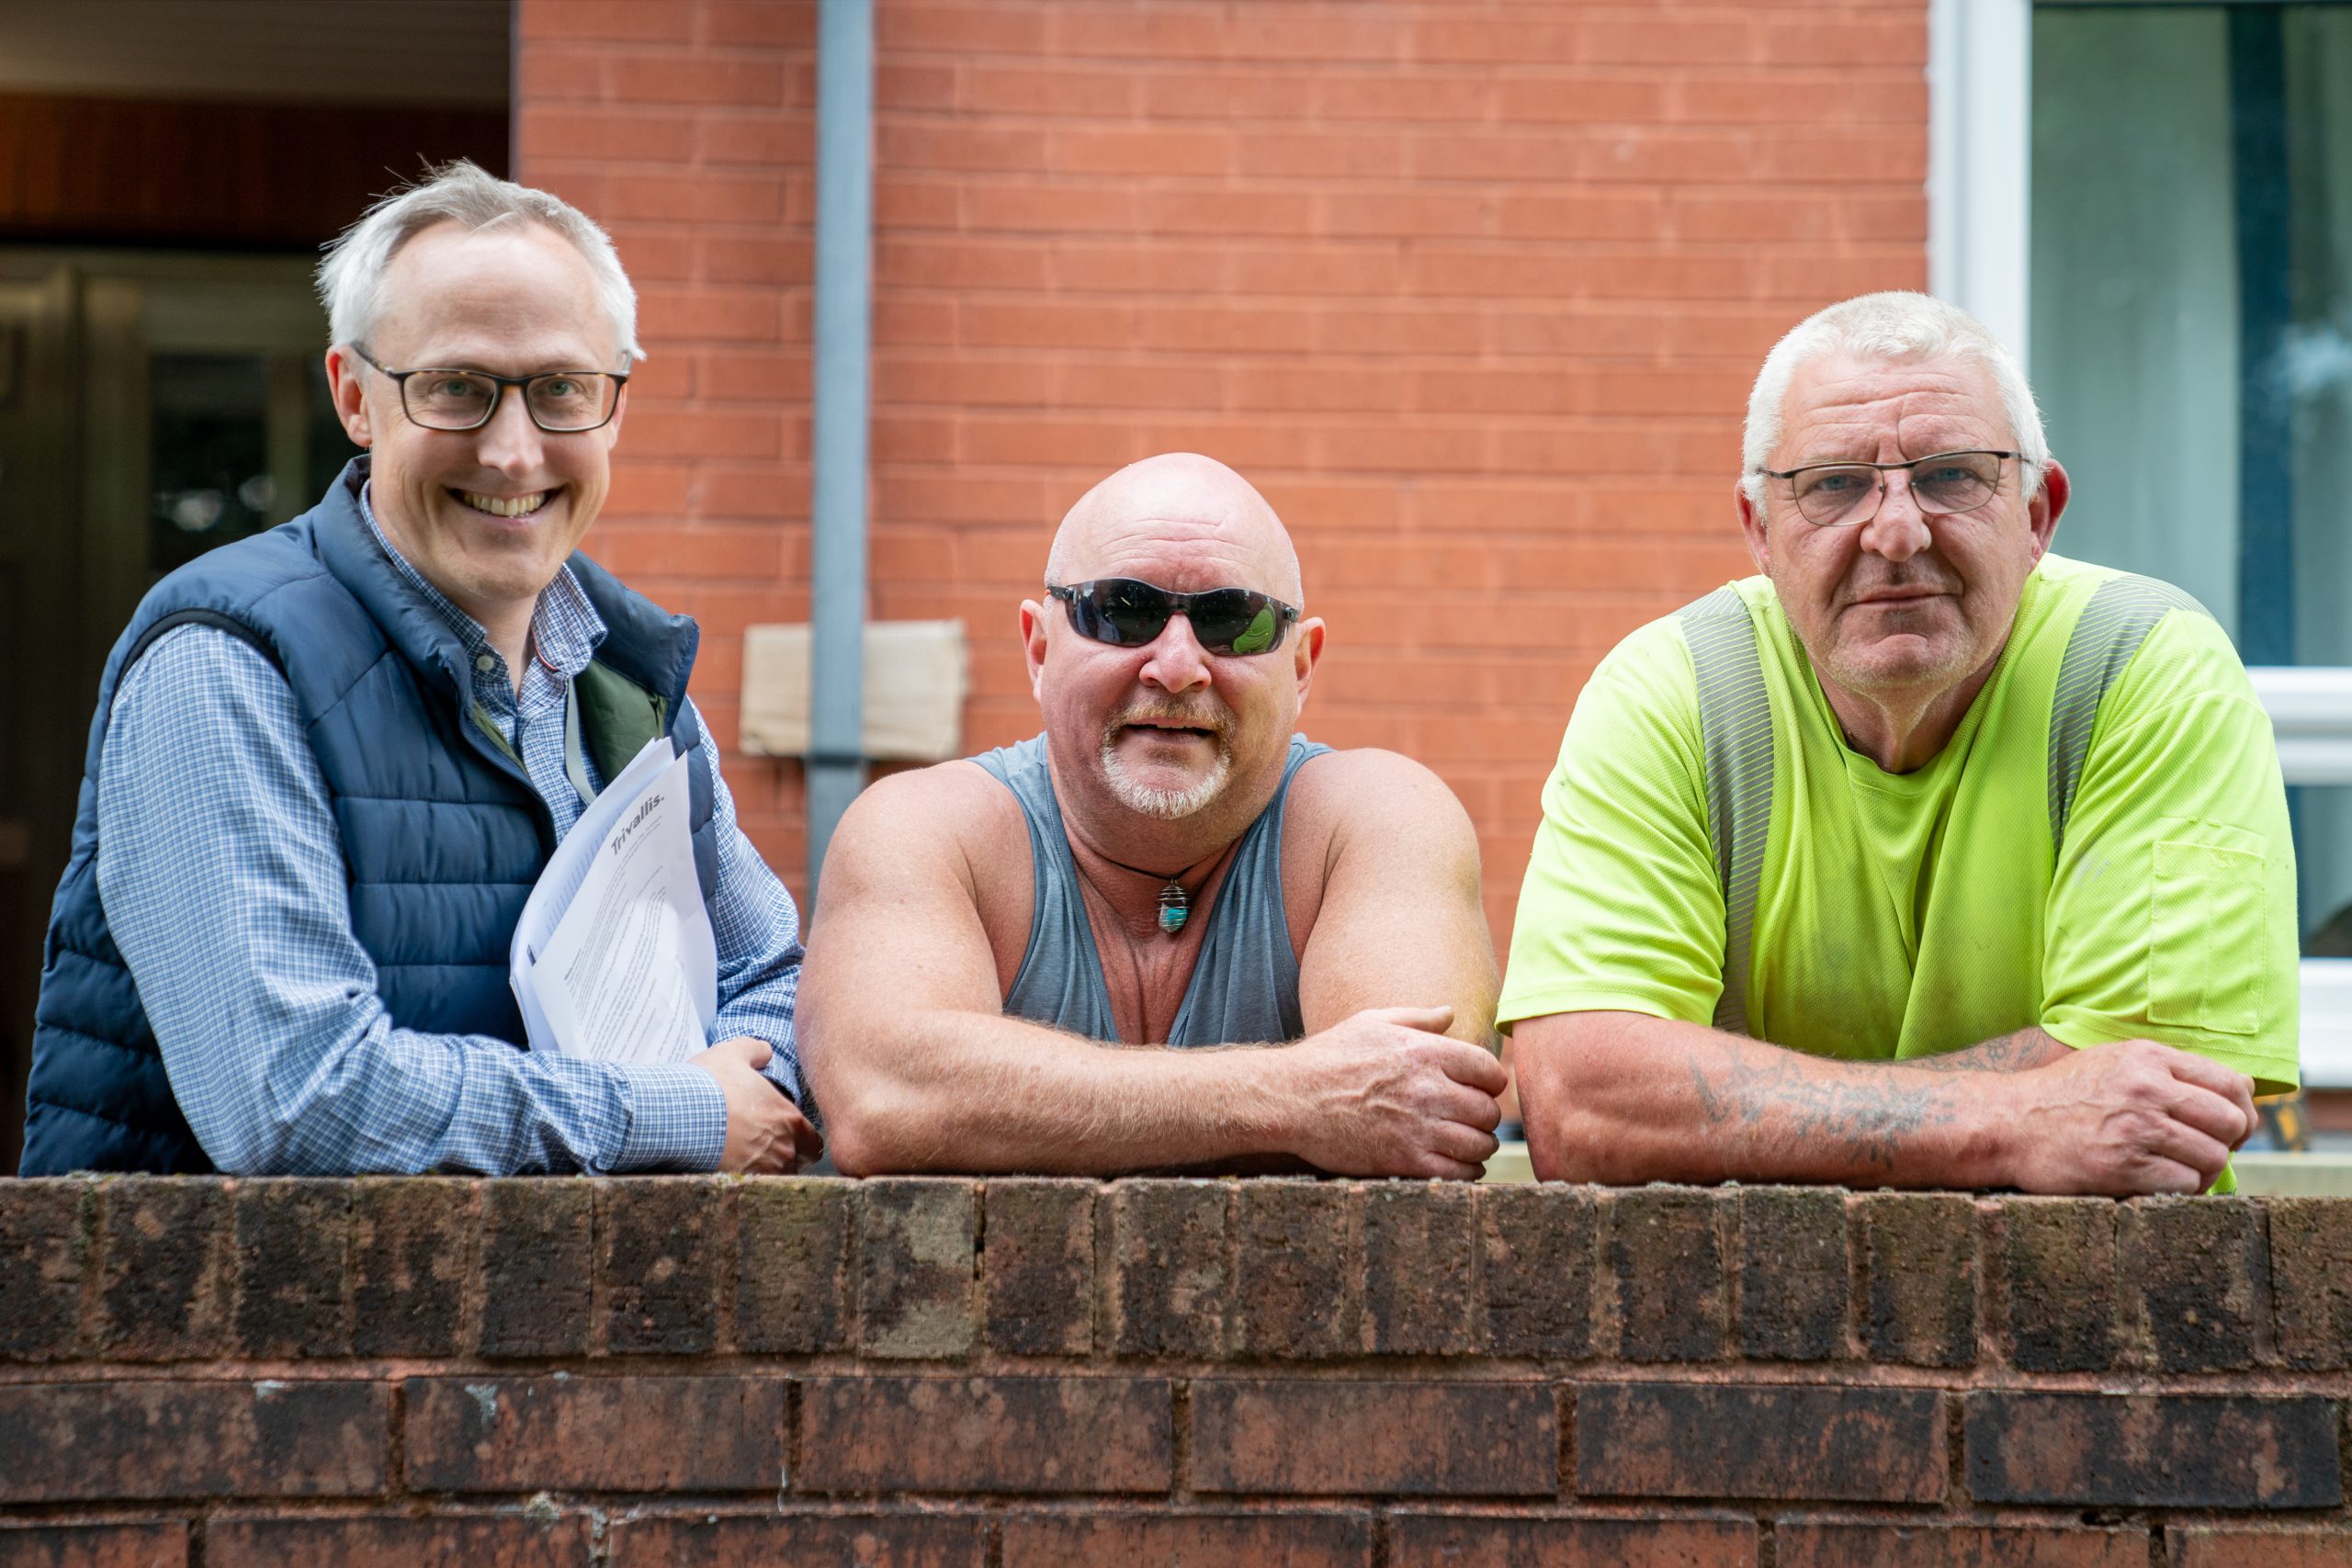 Trivallis Housing Landlord Wales Three men are standing and leaning on a brick wall. The man on the left is wearing glasses, a blue shirt, and a dark vest, holding papers. The middle man has a shaved head, sunglasses, and a gray tank top. The man on the right is wearing glasses and a neon yellow shirt.